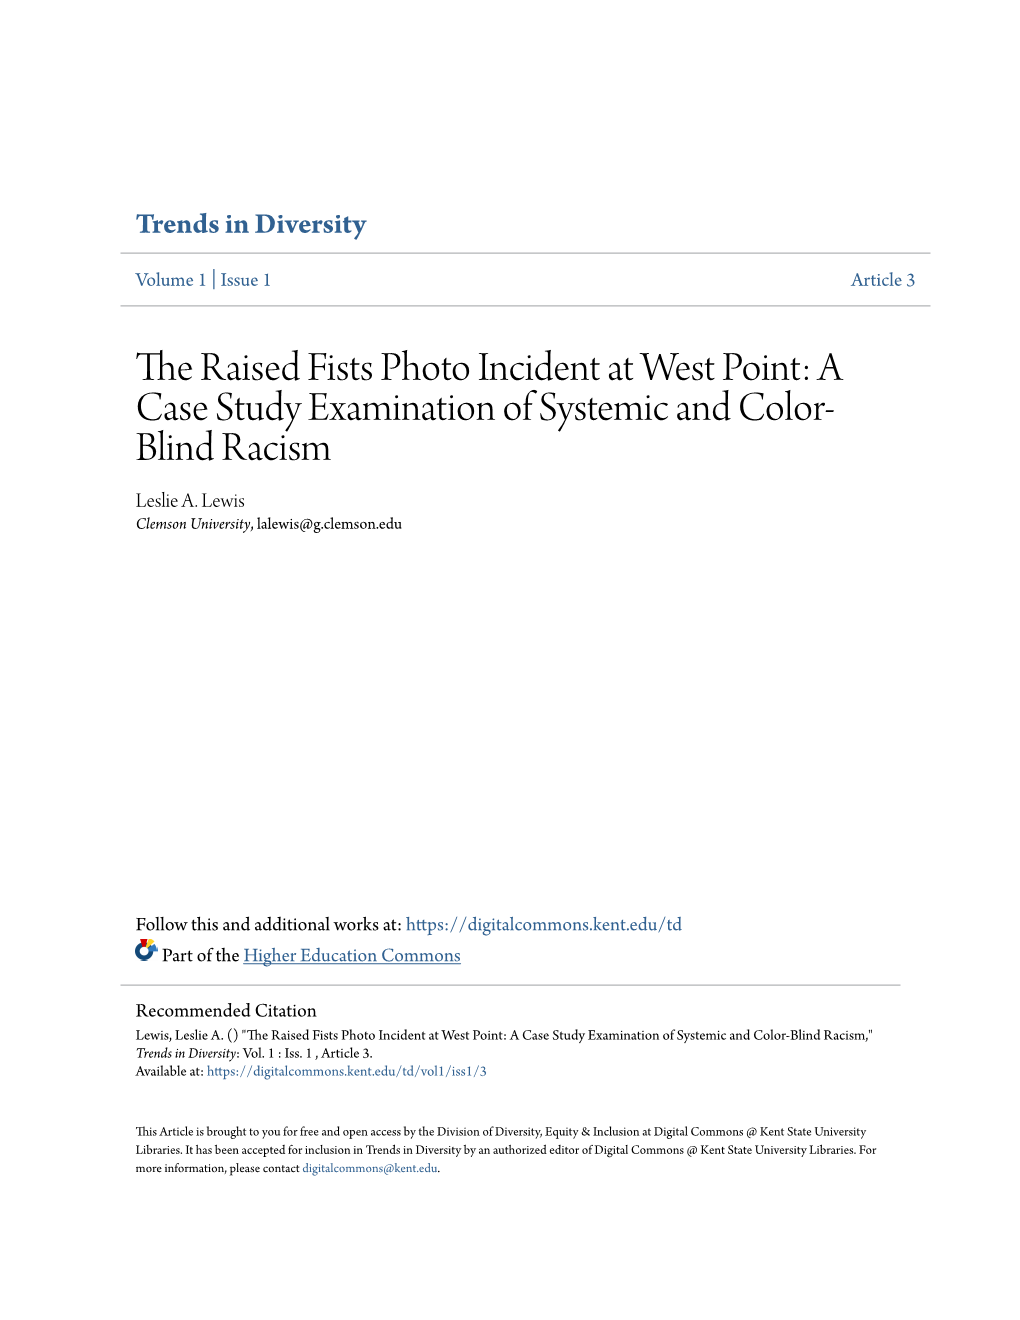 The Raised Fists Photo Incident at West Point Is No Exception